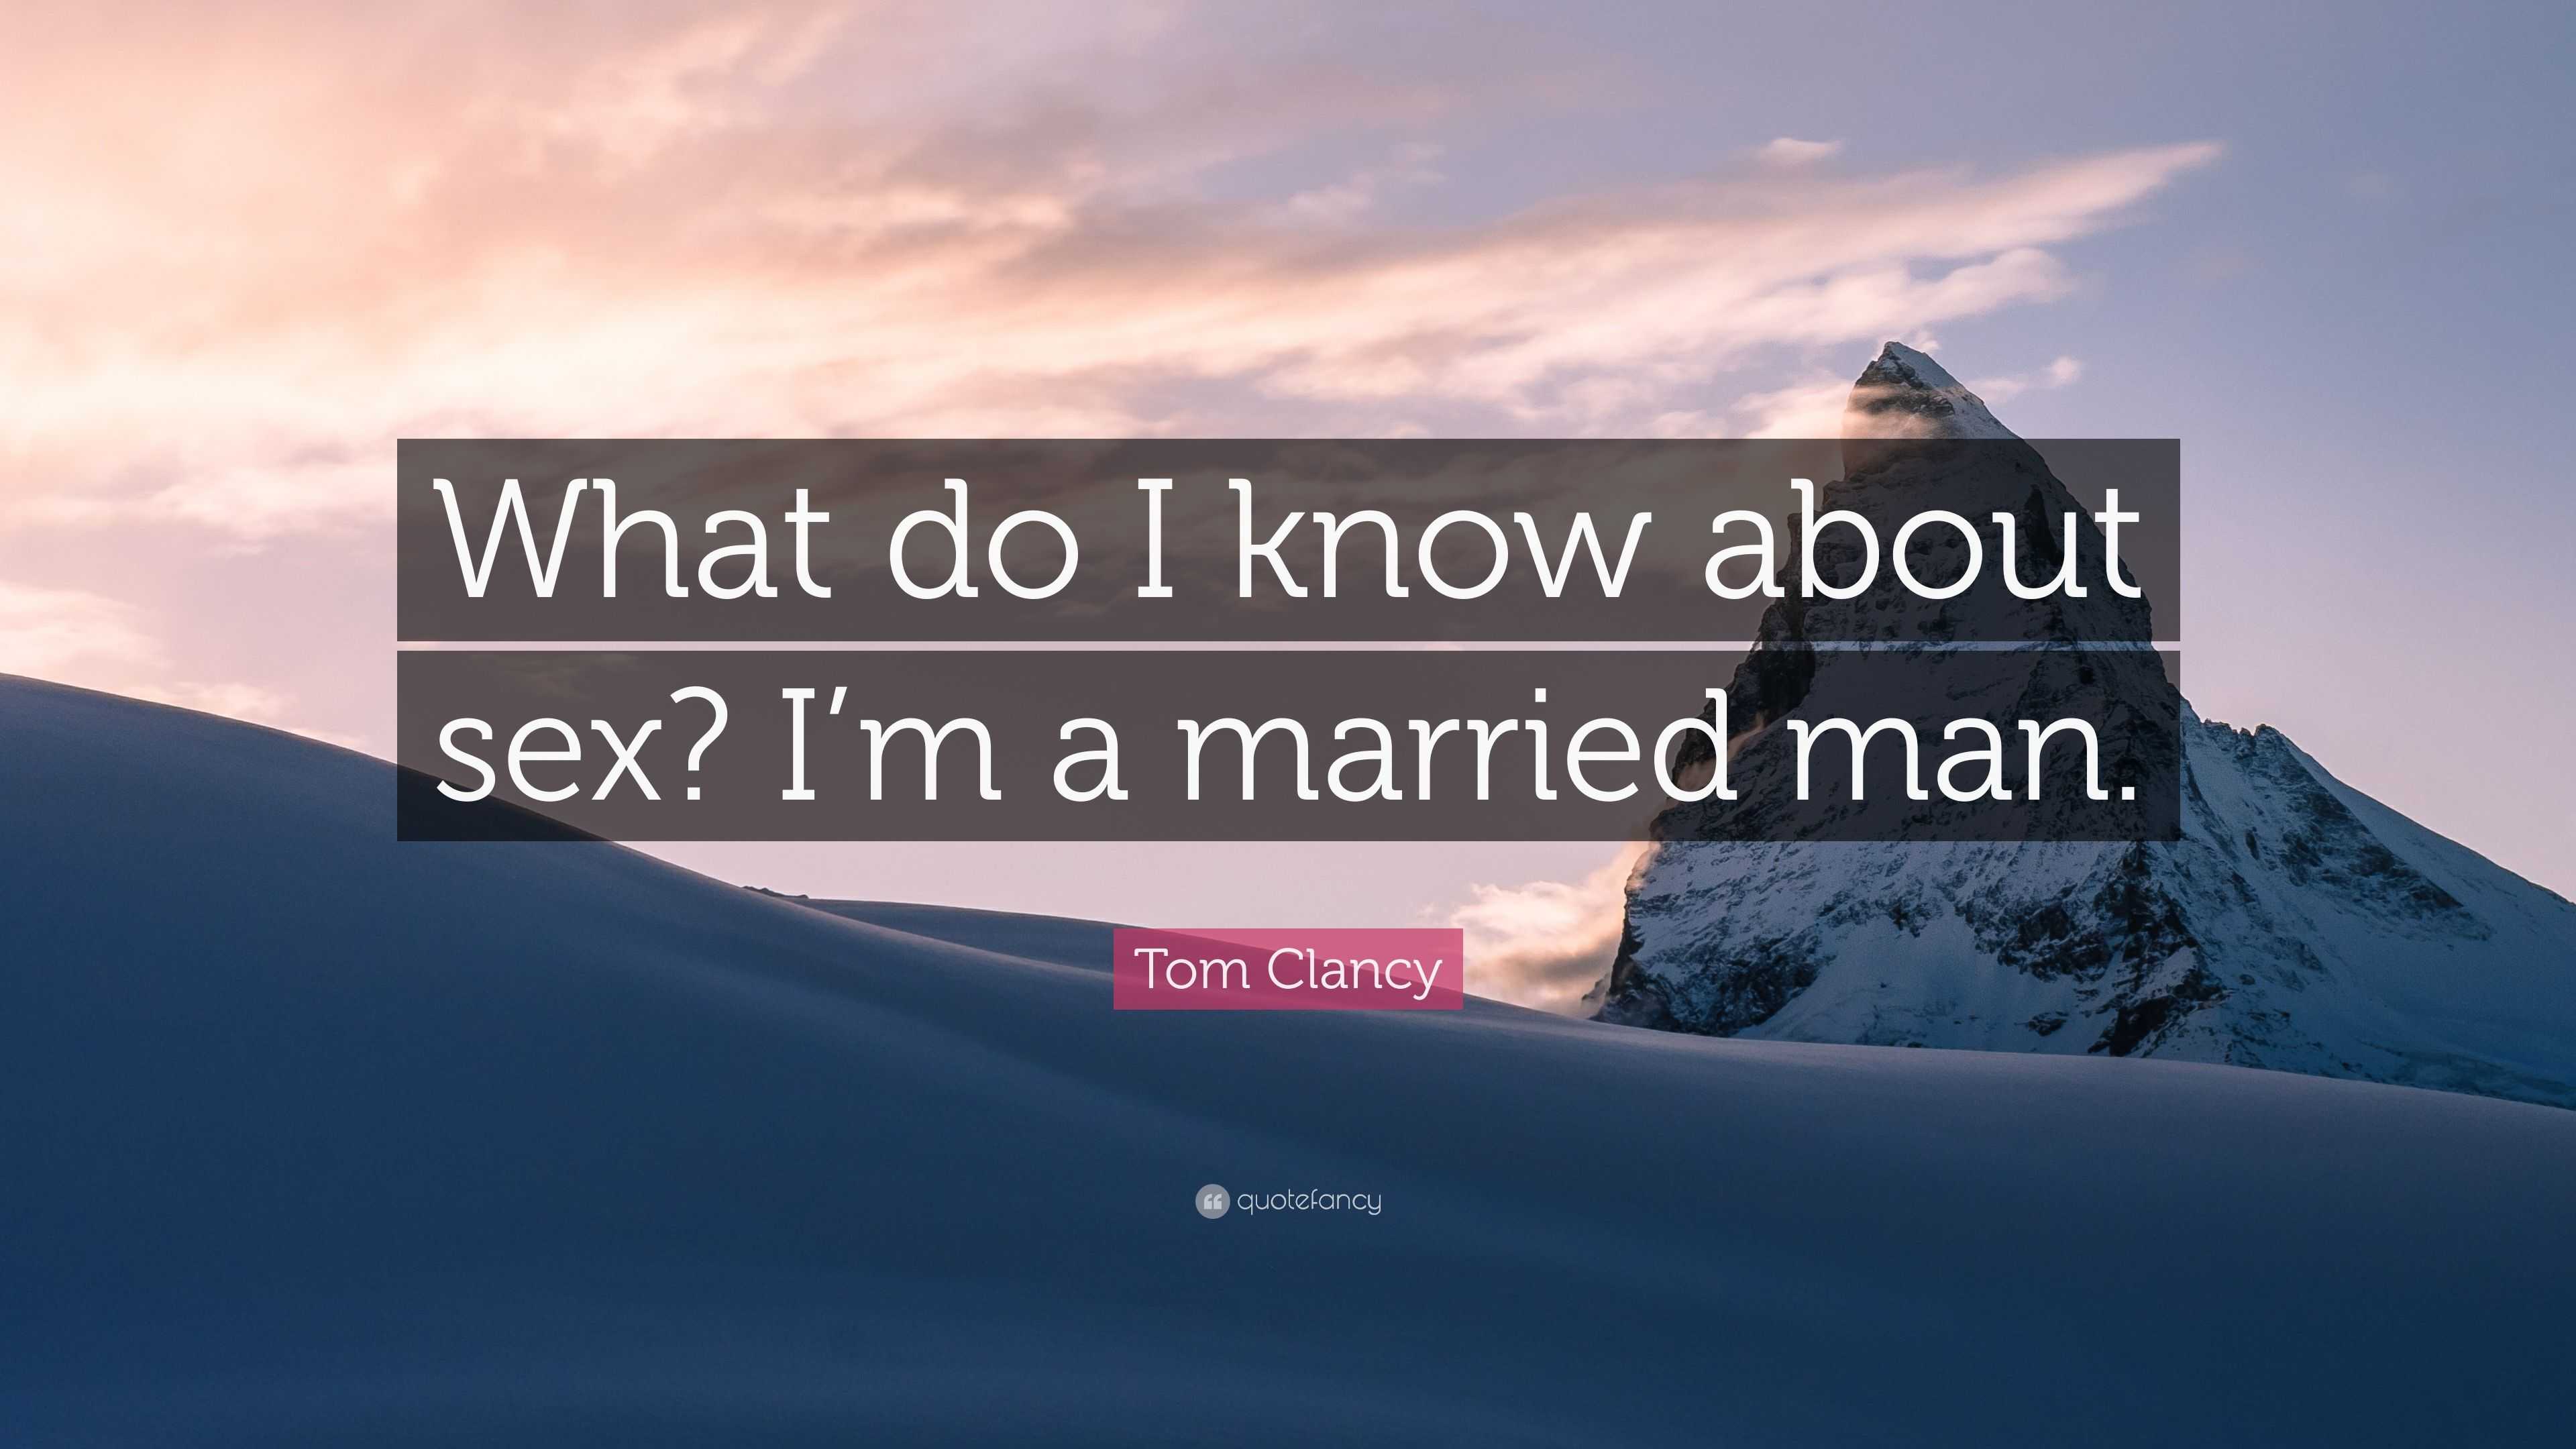 Tom Clancy Quote “What do I know about sex? Im a married man.” picture